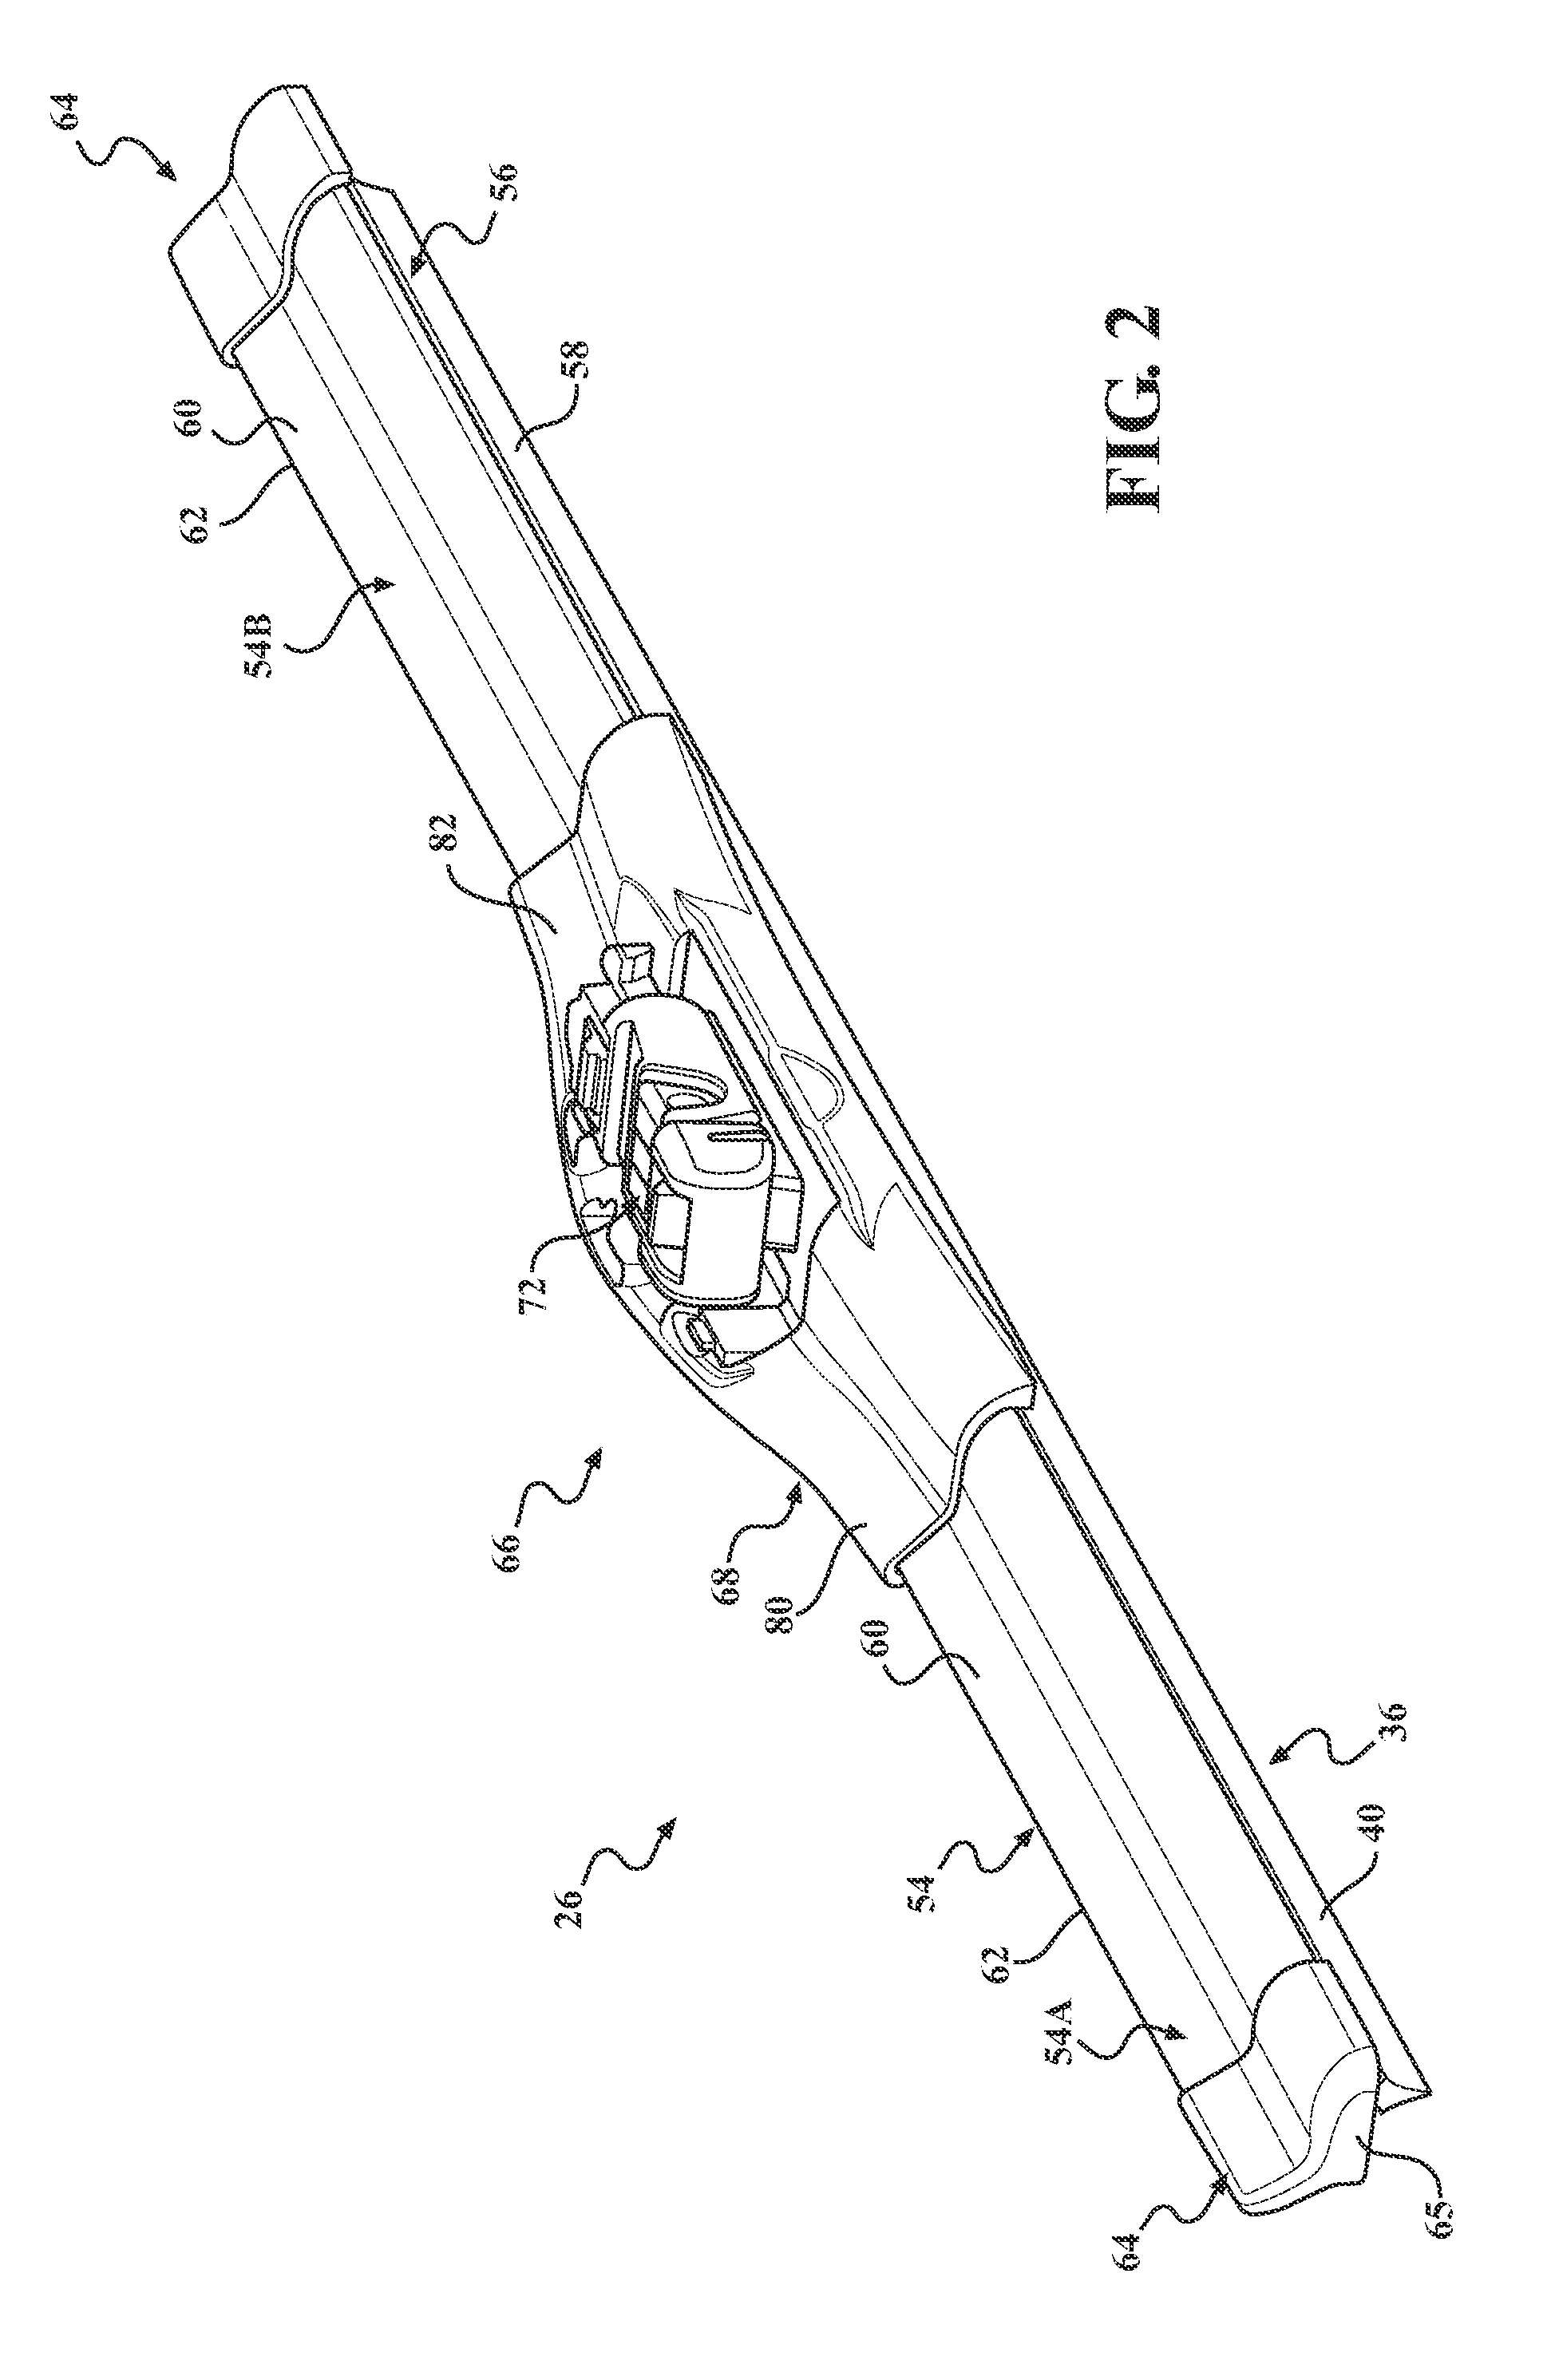 Universal coupler for a beam blade windshield wiper assembly